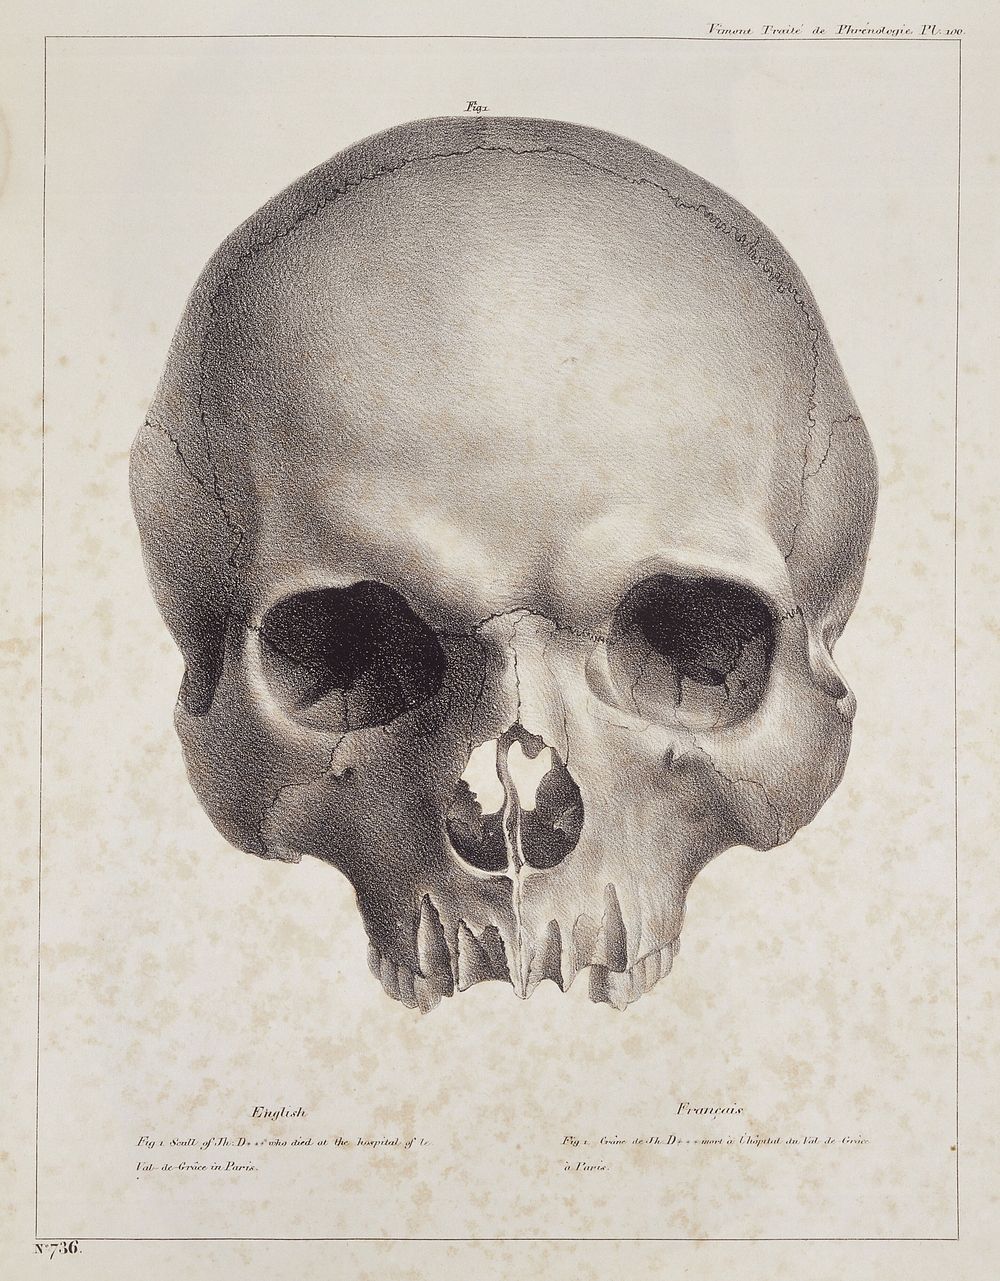 Skull, from Treatise on human and comparative phrenology.